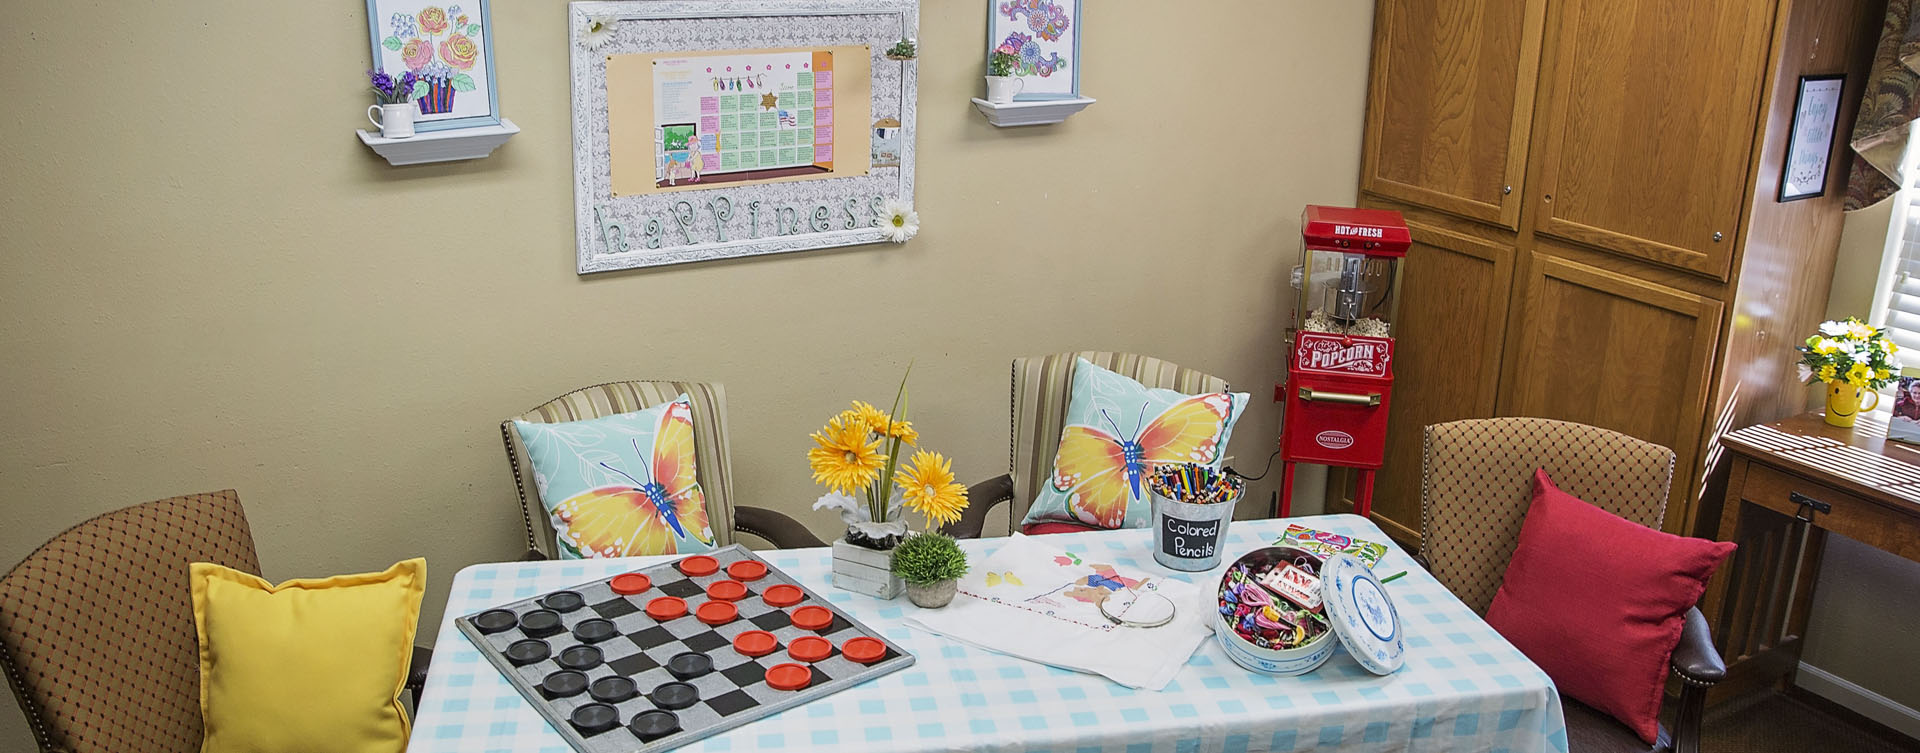 Unleash your creative side in the activity room at Bickford of Grand Island